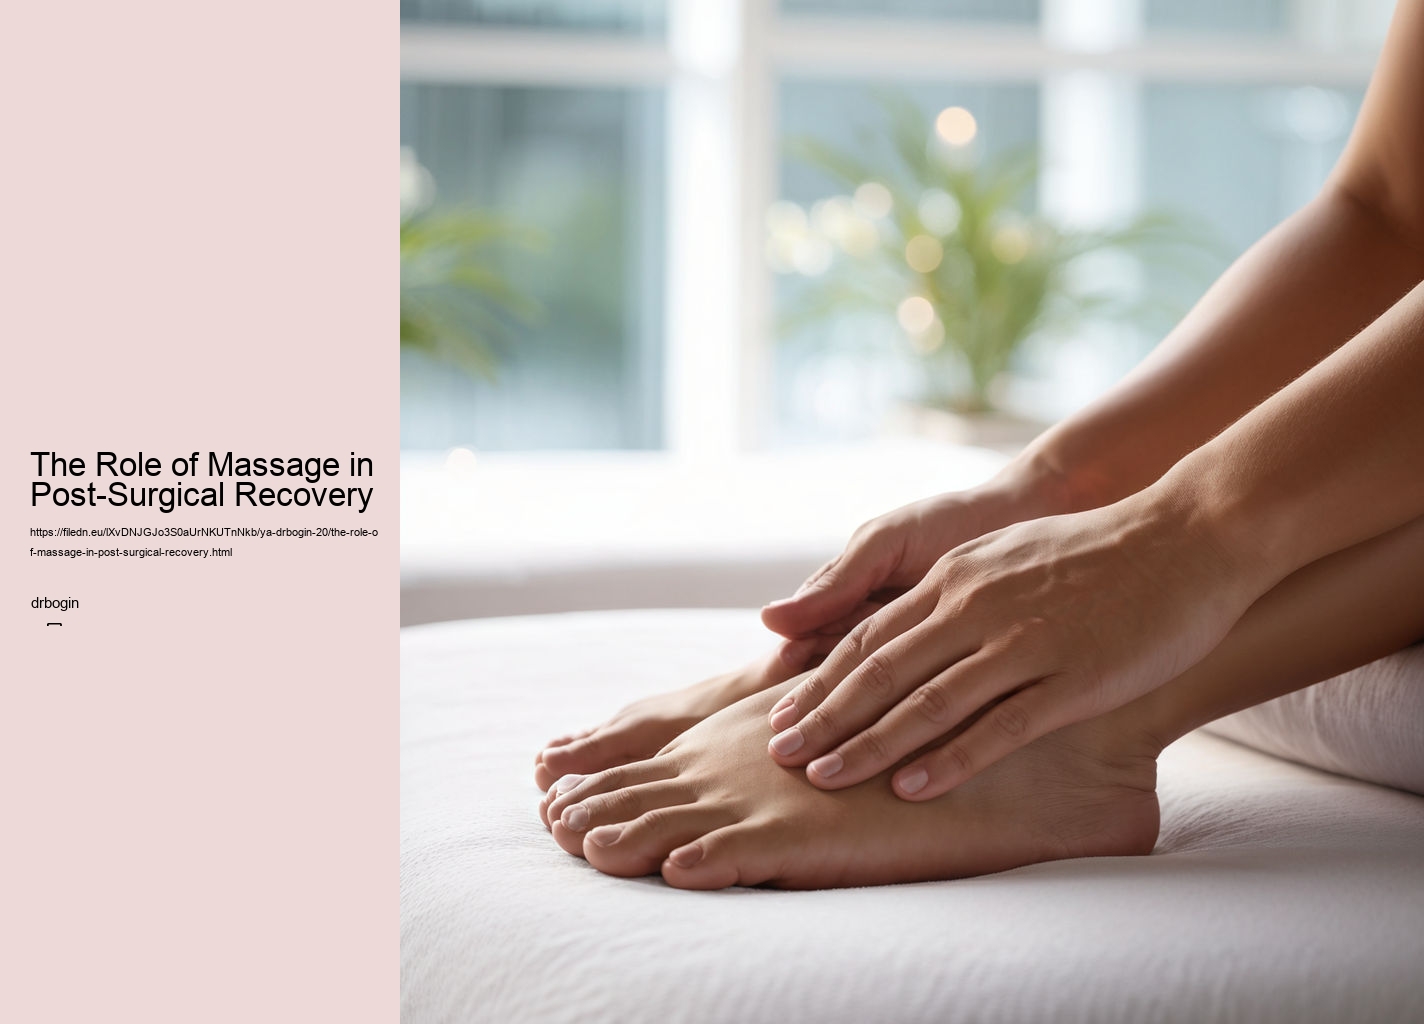 The Role of Massage in Post-Surgical Recovery